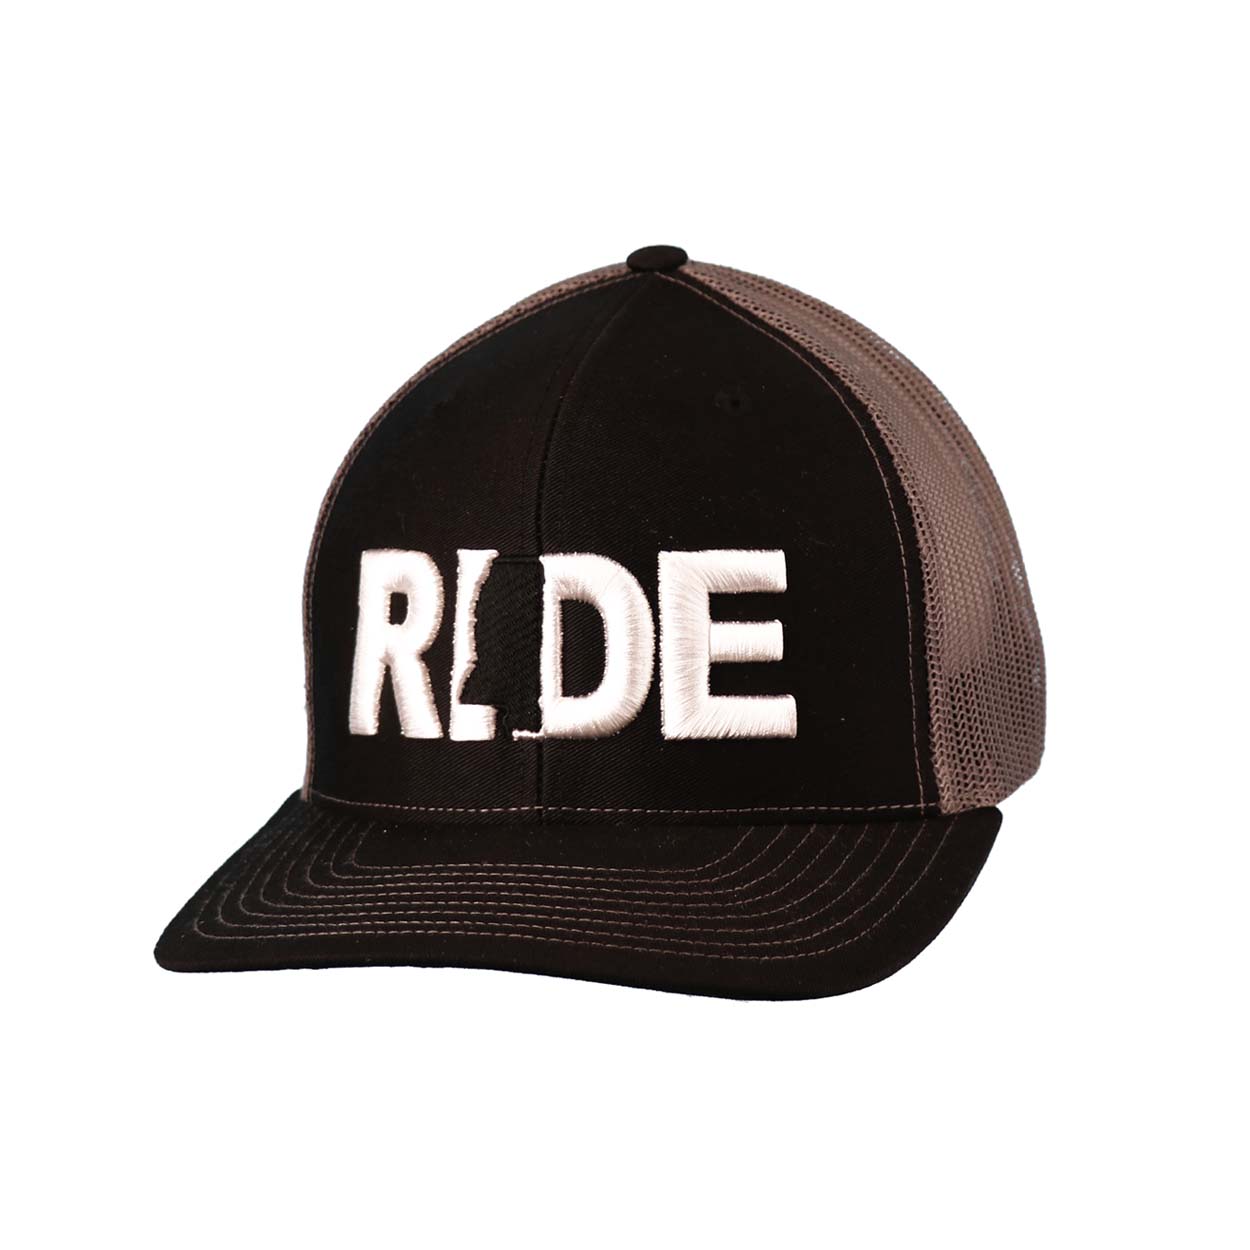 Ride Mississippi Classic Pro 3D Puff Embroidered Snapback Trucker Hat Black/Gray